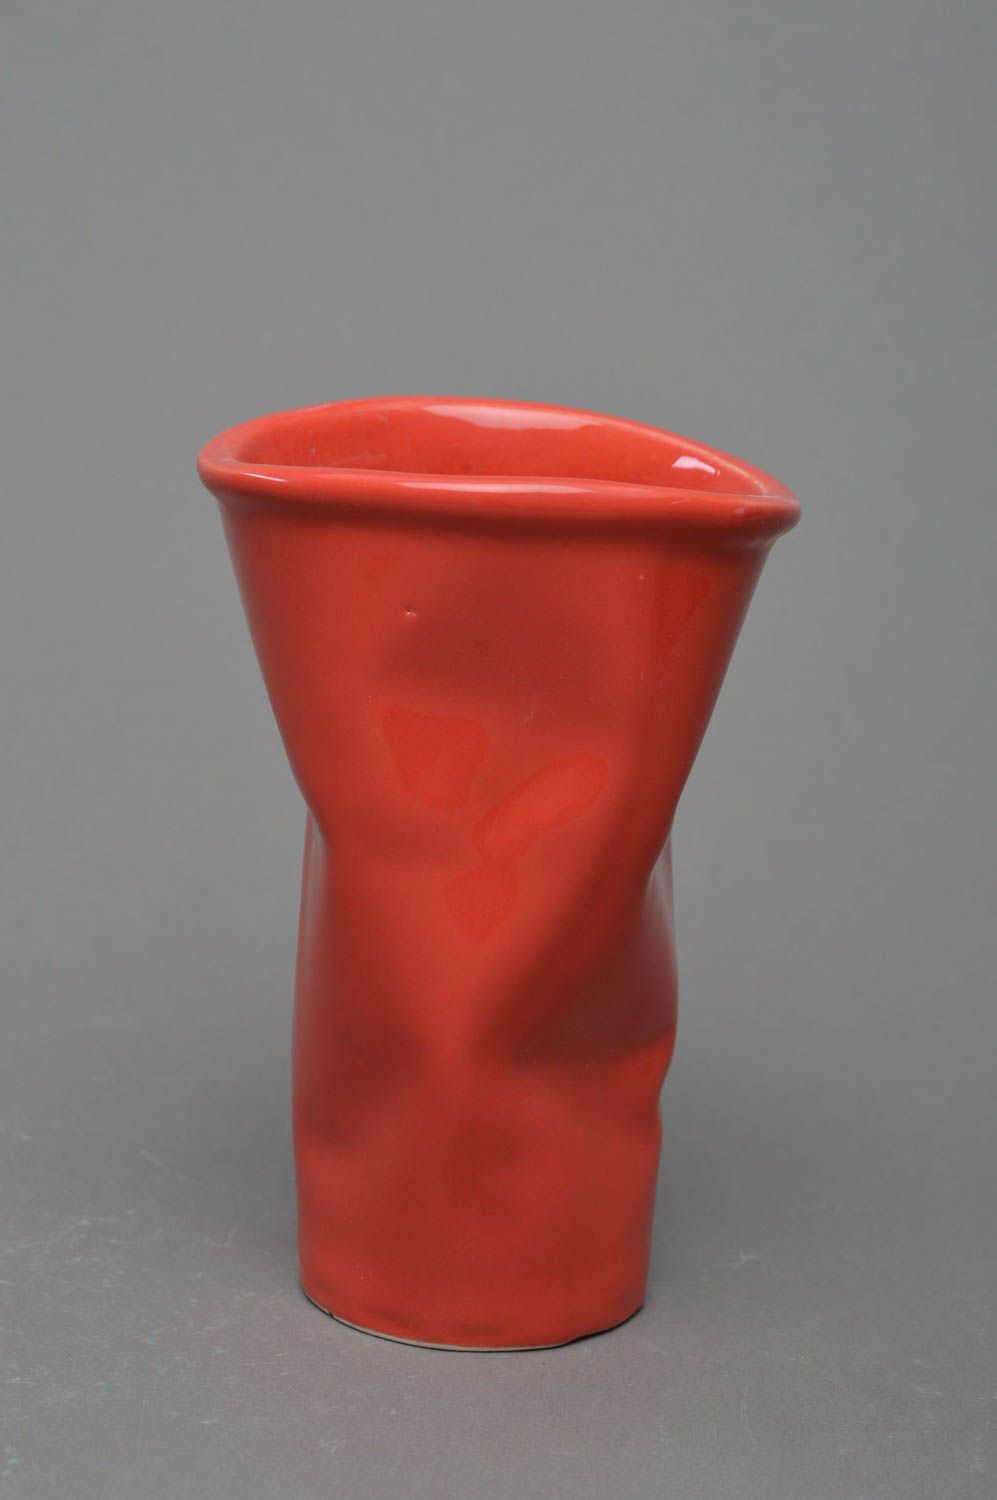 Porcelain red color fake plastic crinkled cup with no handle photo 1